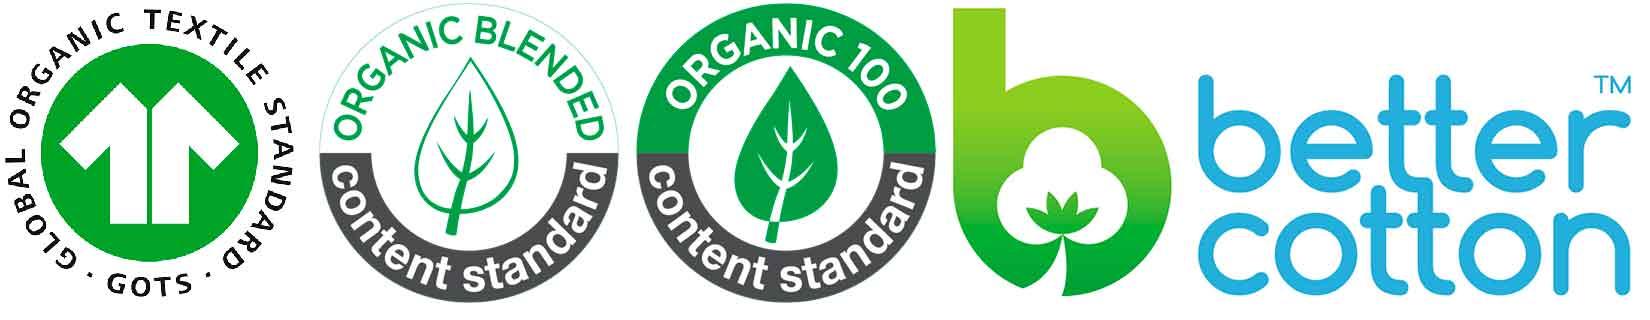 Organic cottons certified